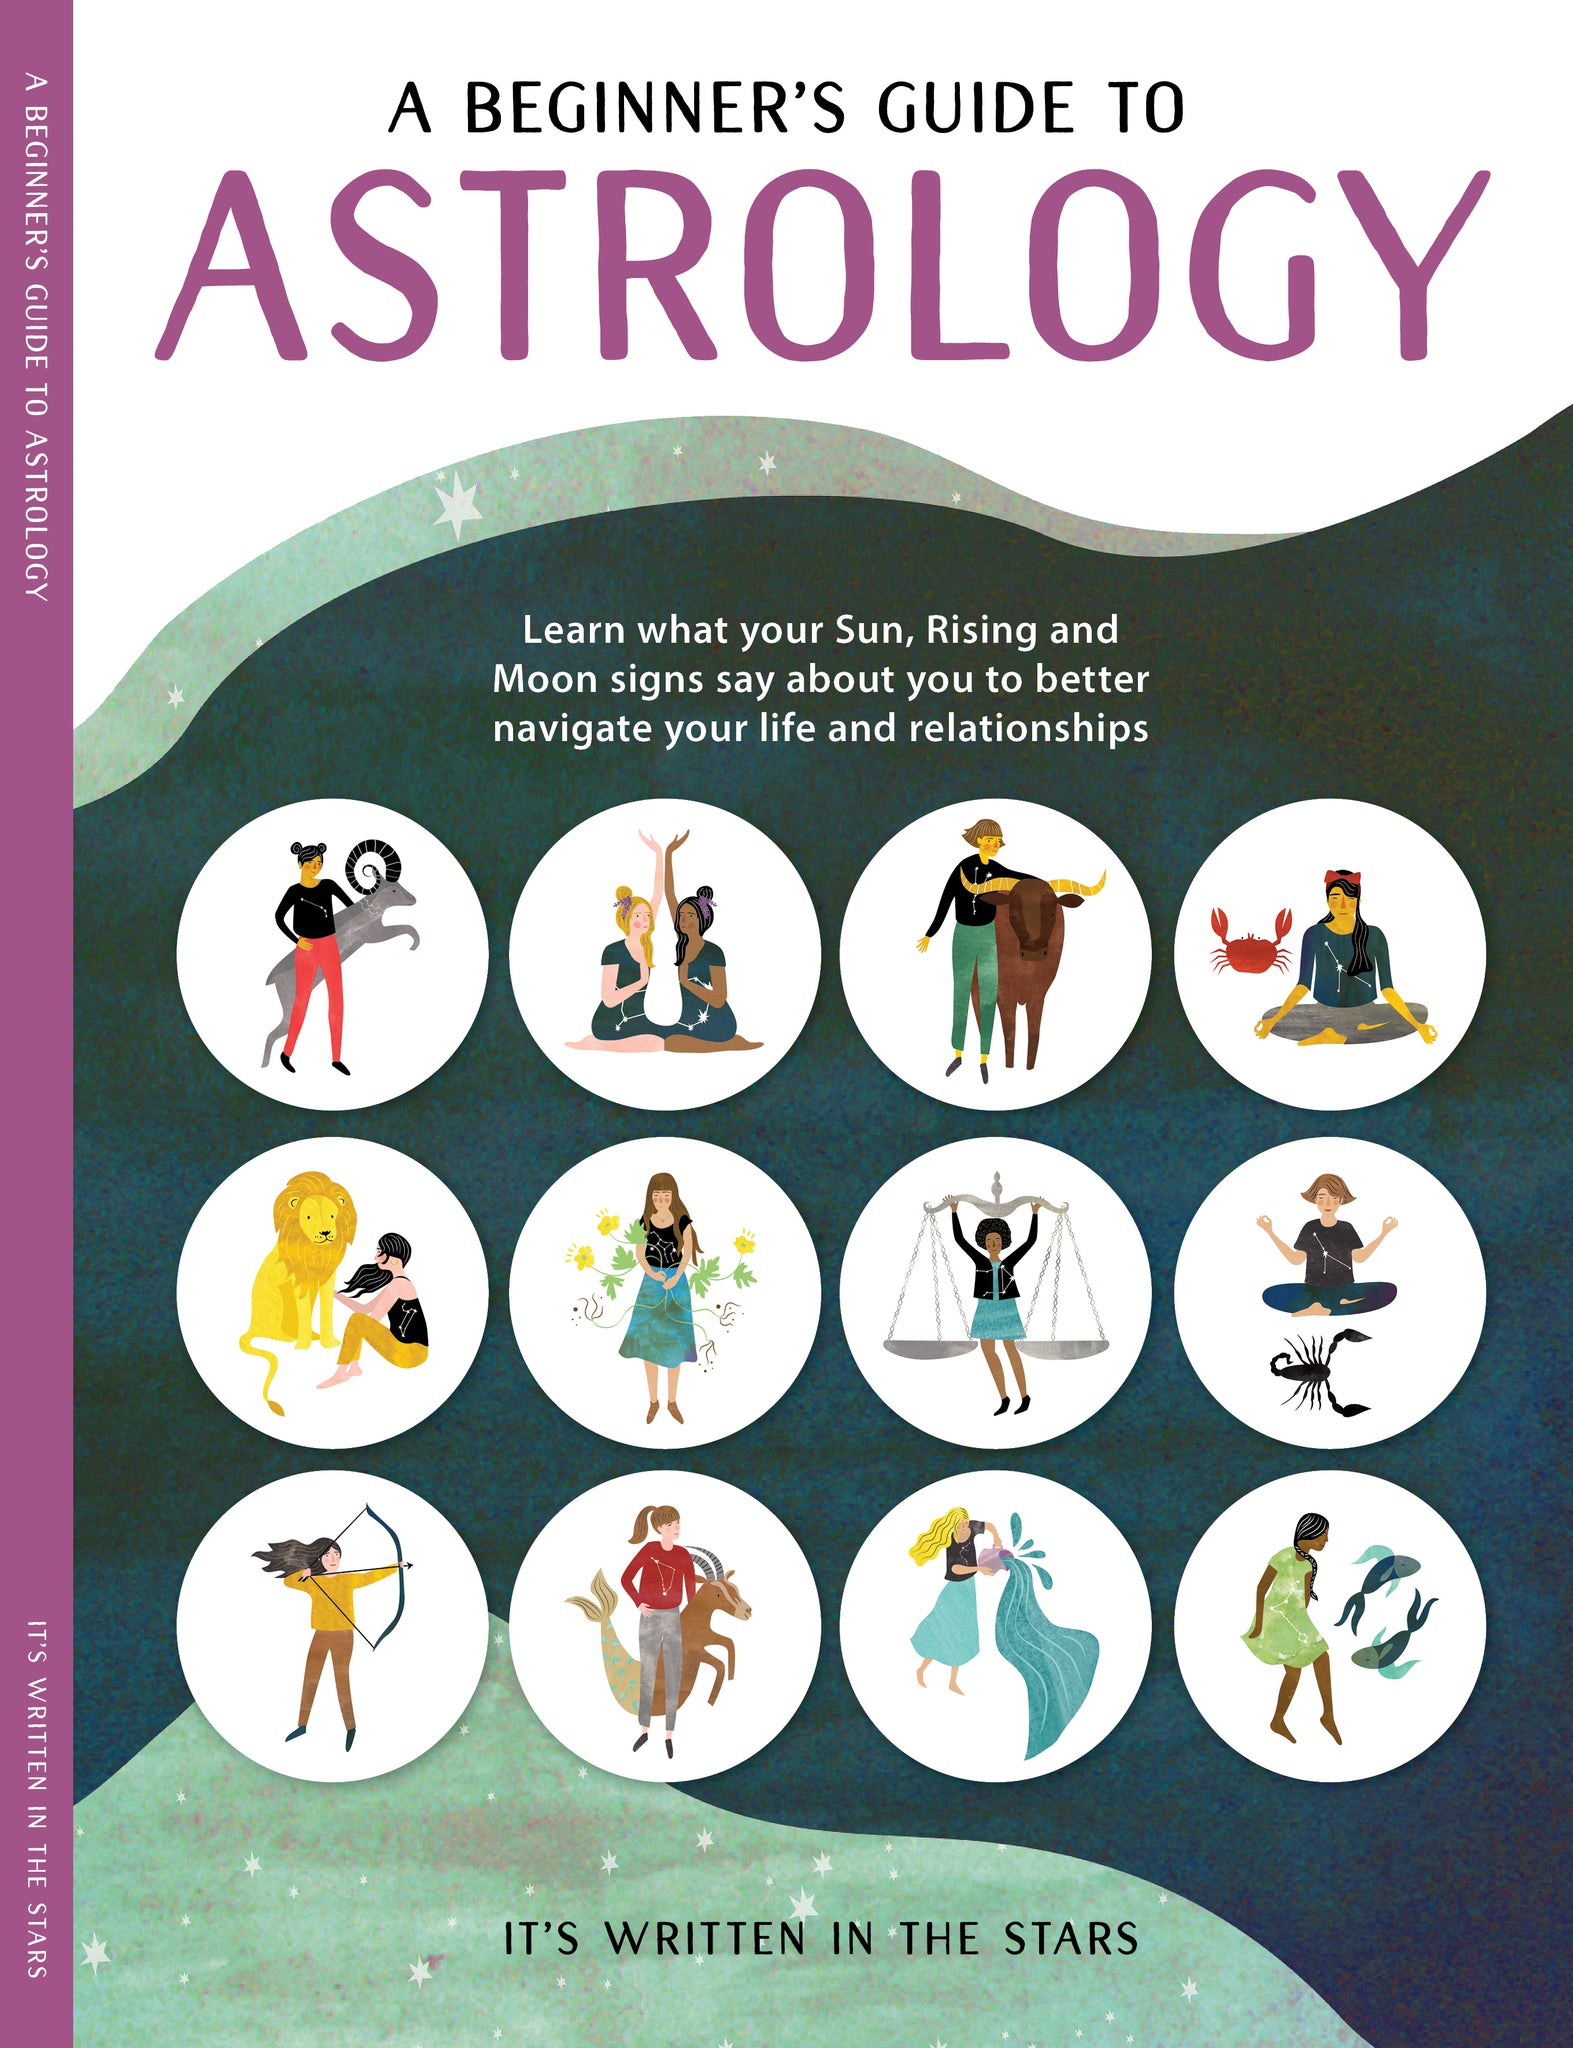 A Beginners Guide to Astrology